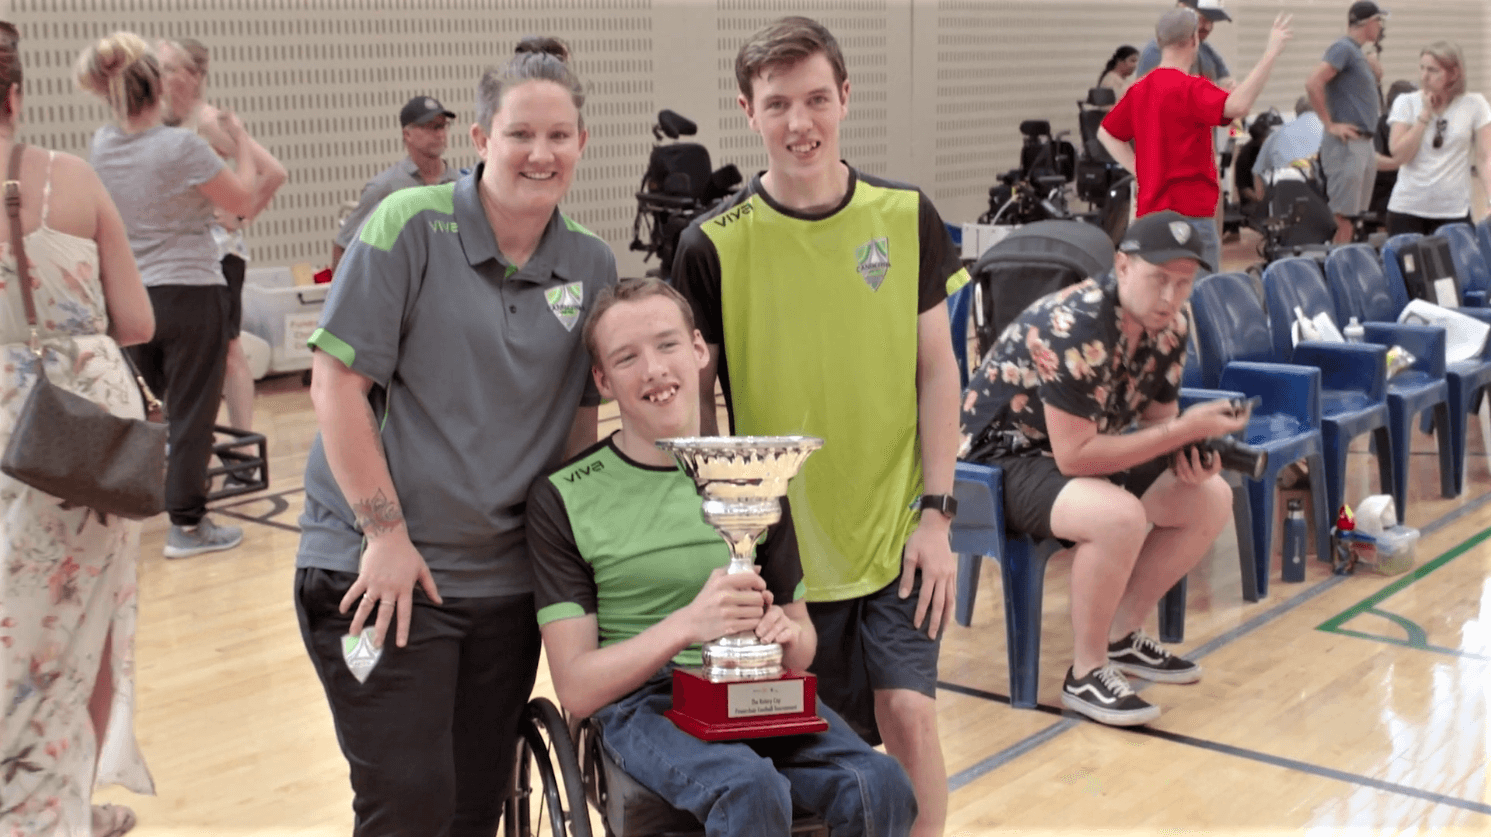 A boy and a woman posing with another boy in a wheelchair, holding a trophy